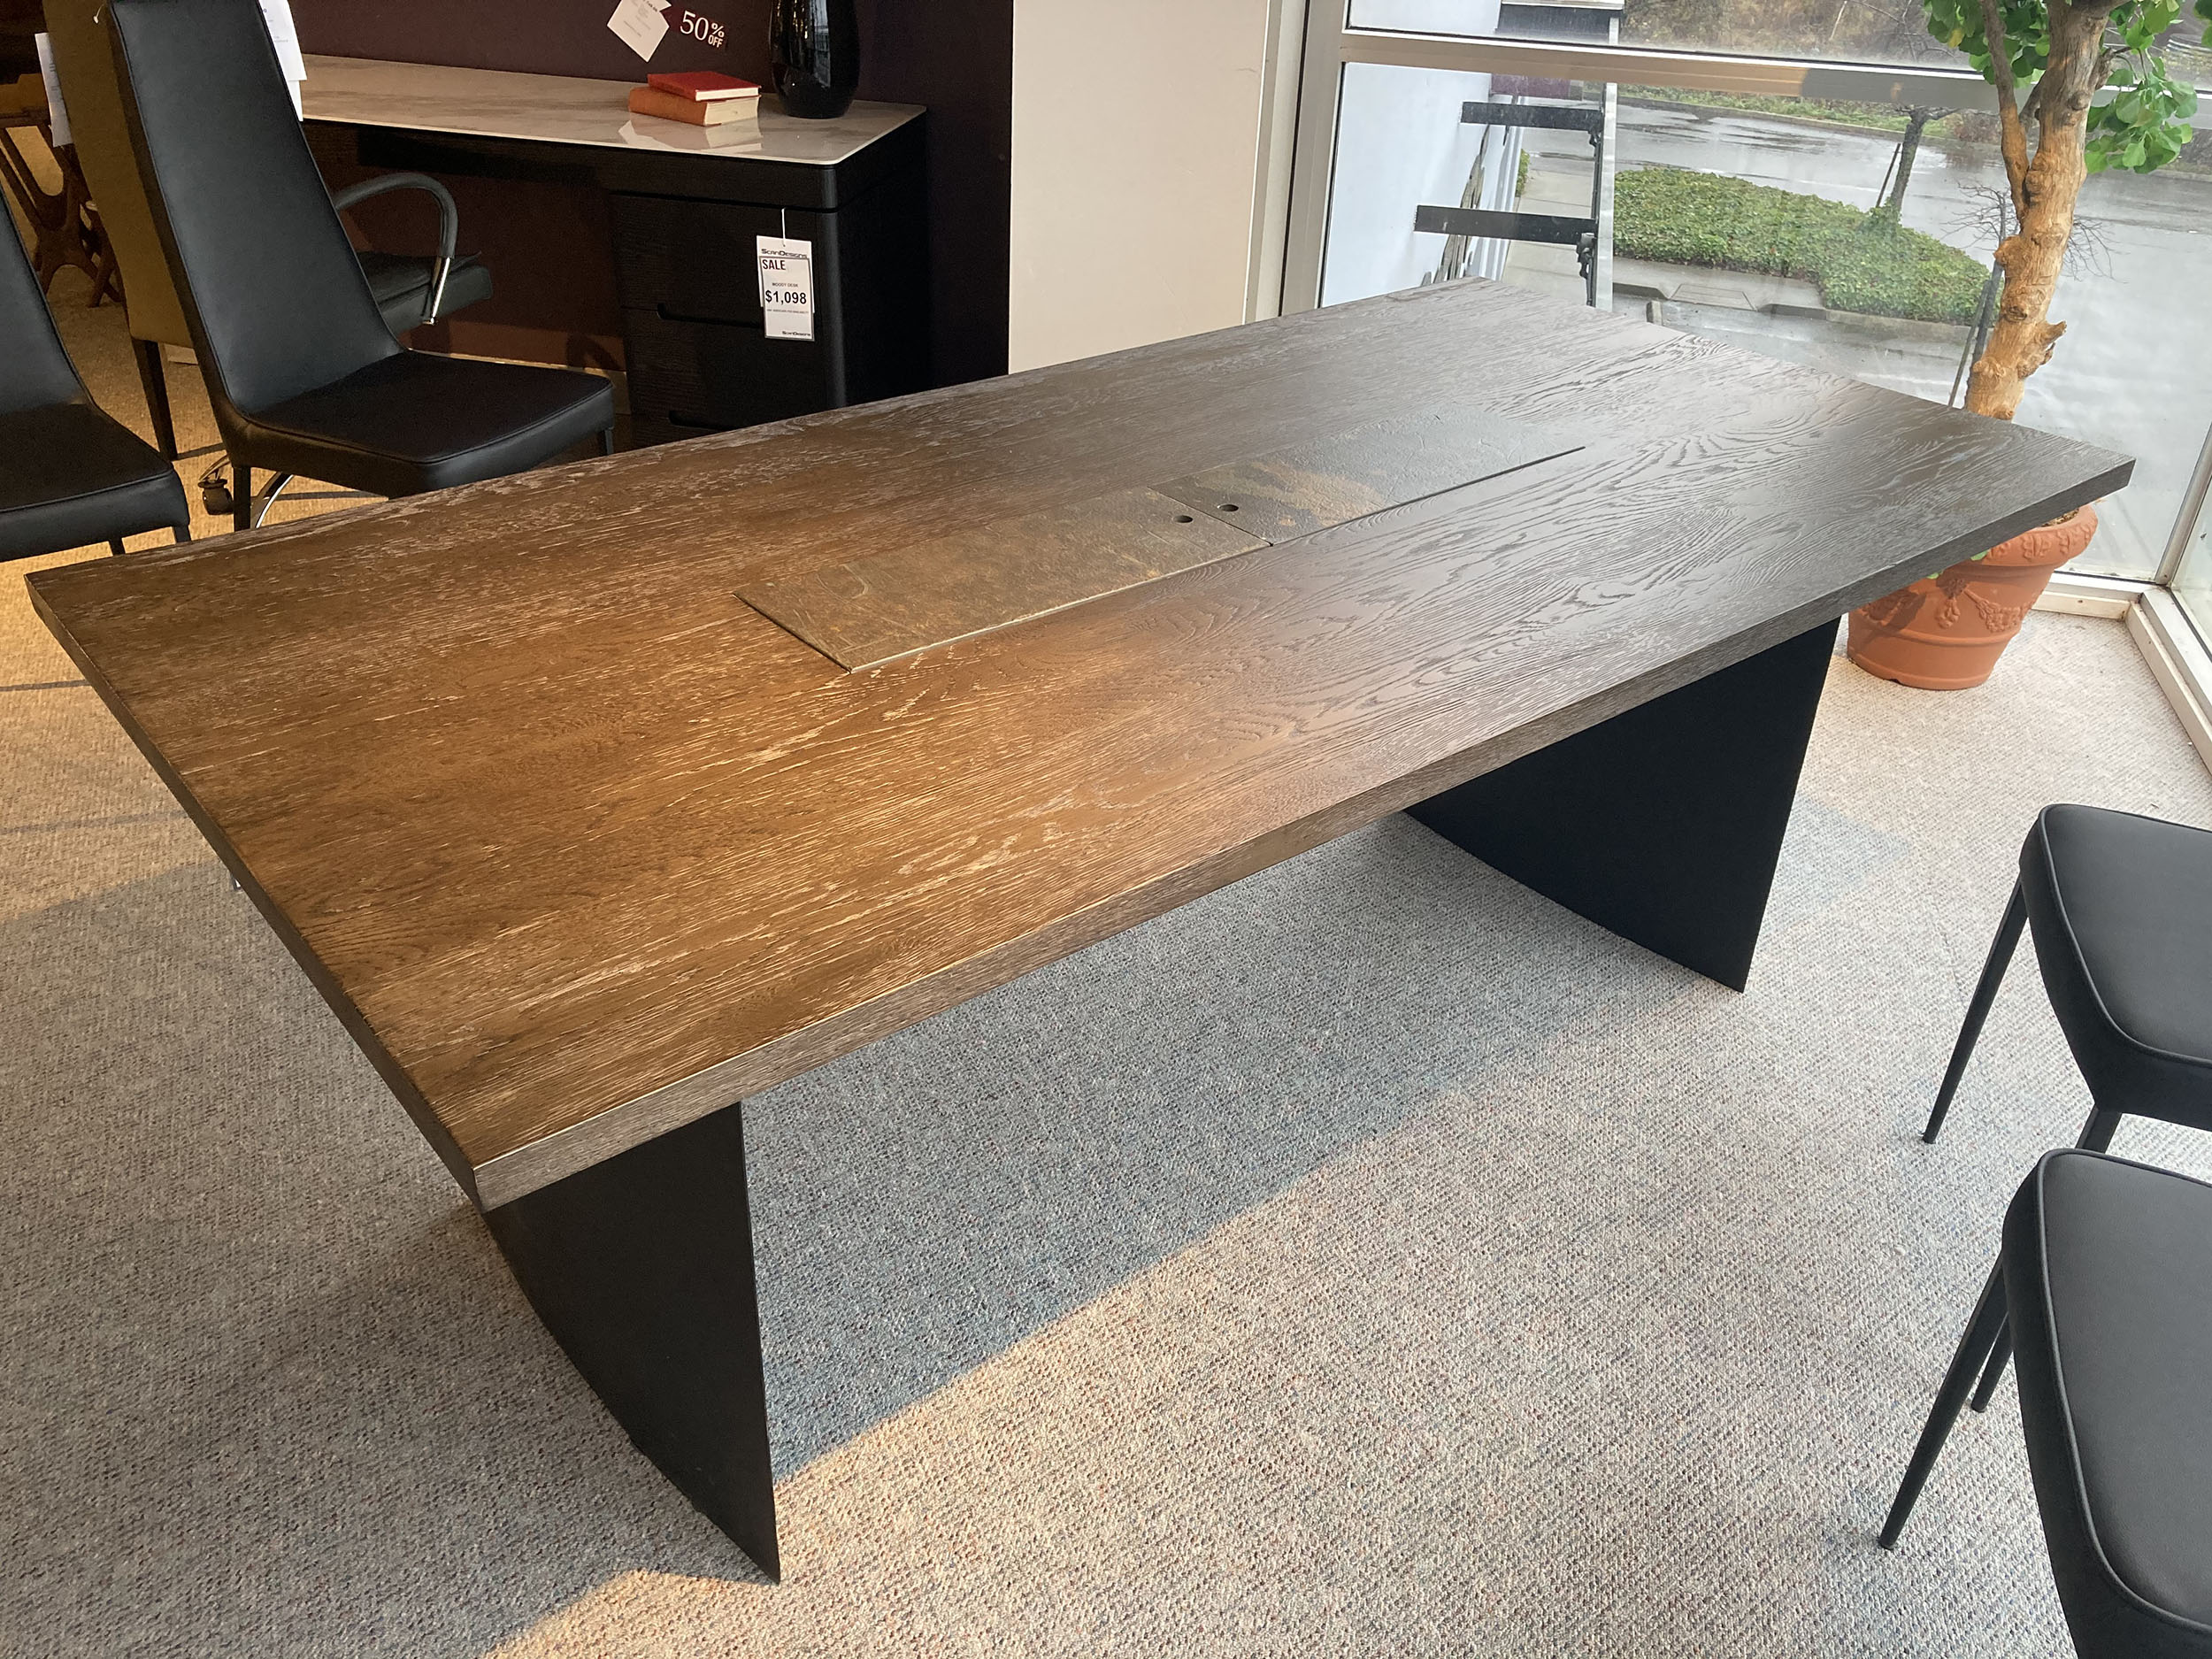 https://www.scandesigns.com/wp-content/uploads/2020/12/Cave-Dining-Table.jpg